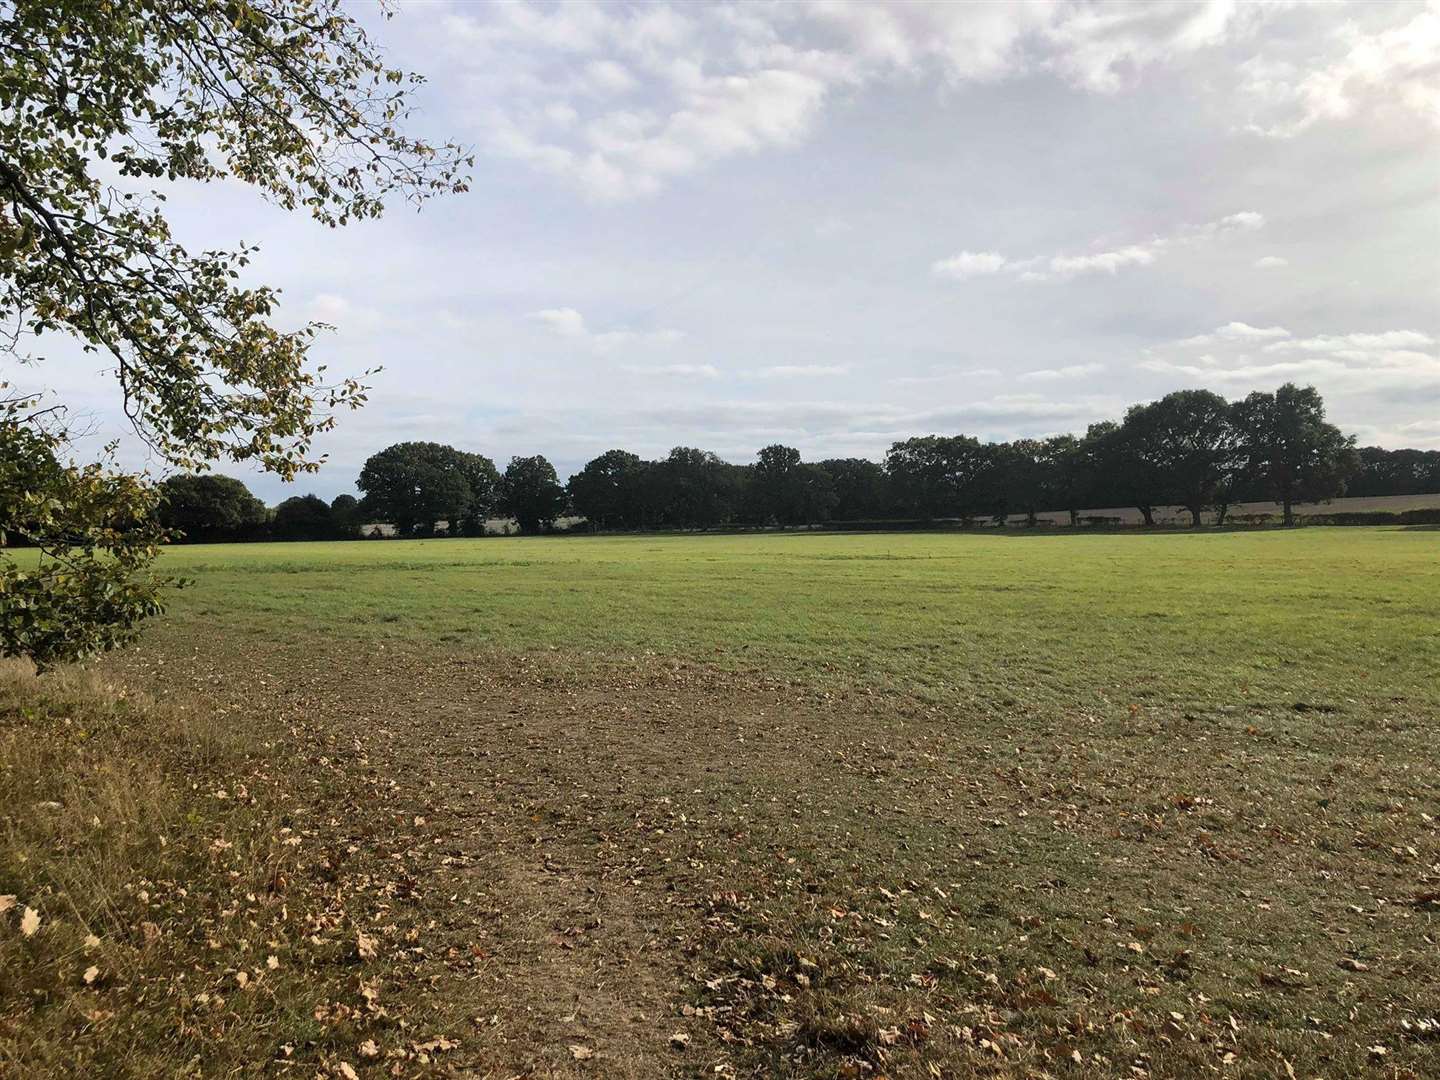 The proposed site